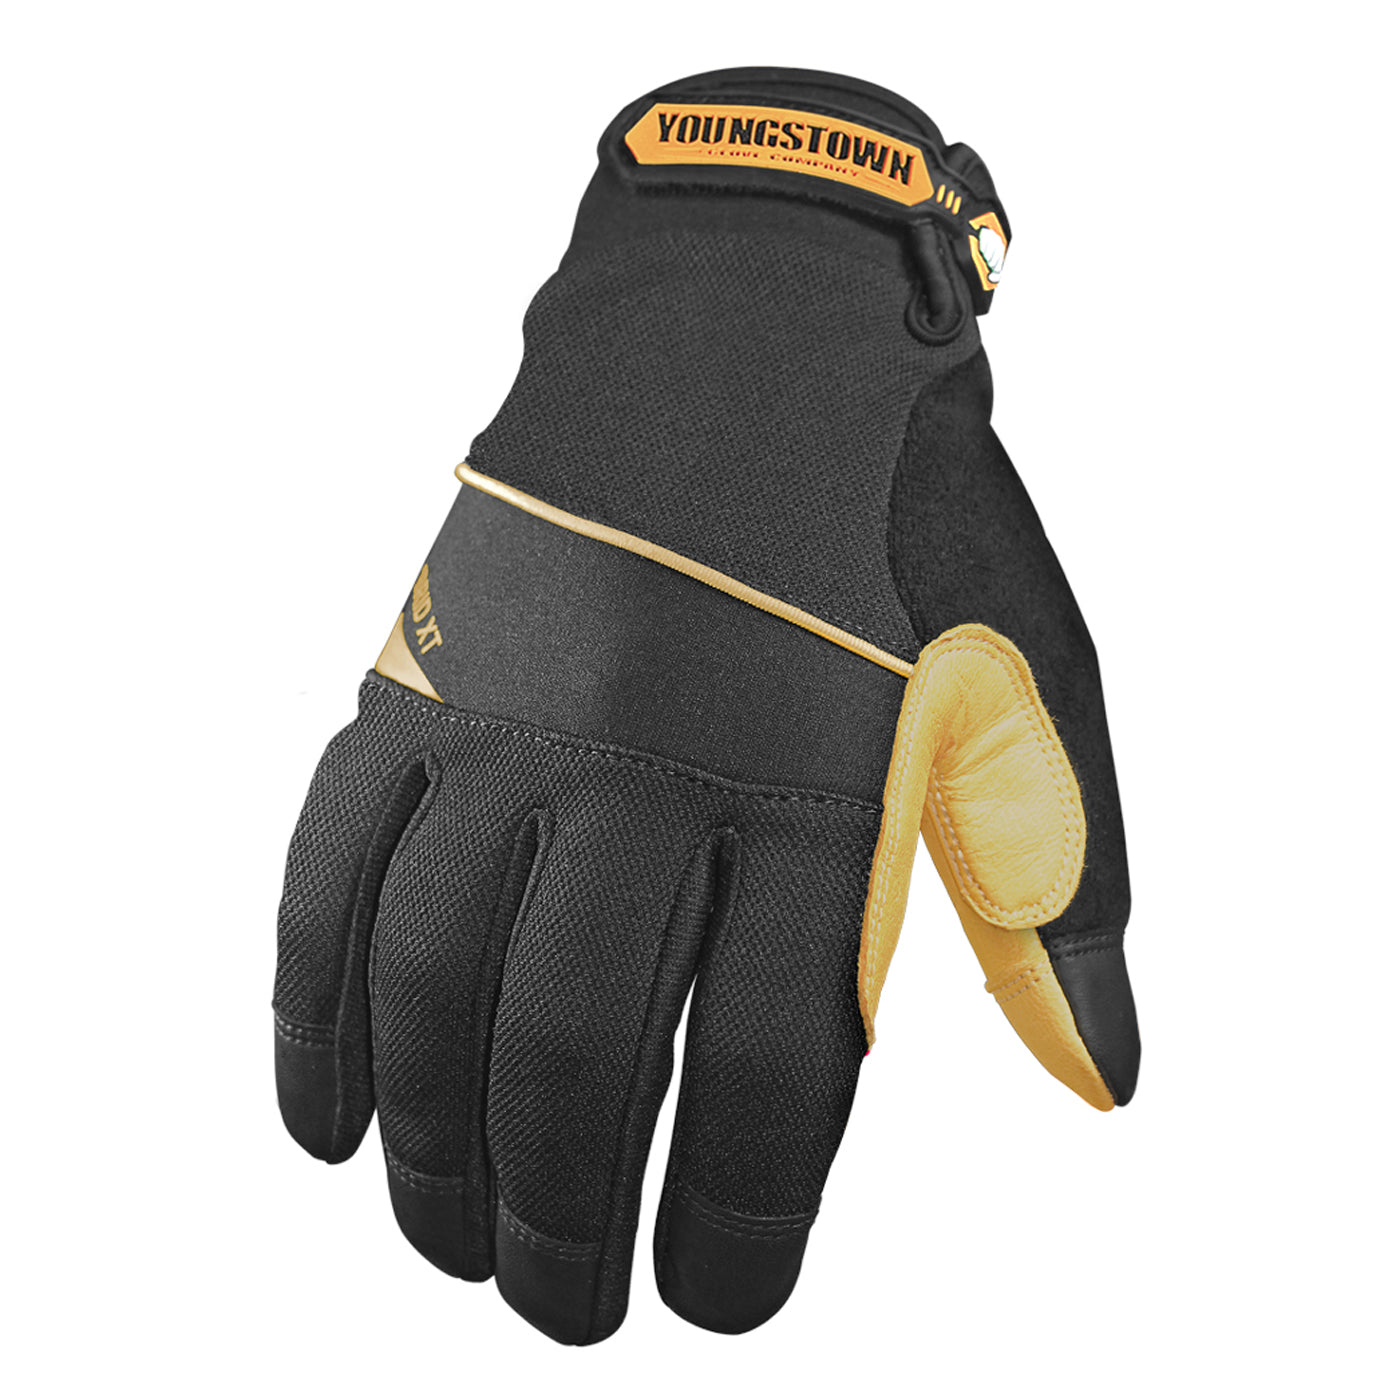 12-3185-70 Youngstown Hybrid XT Glove - Main image